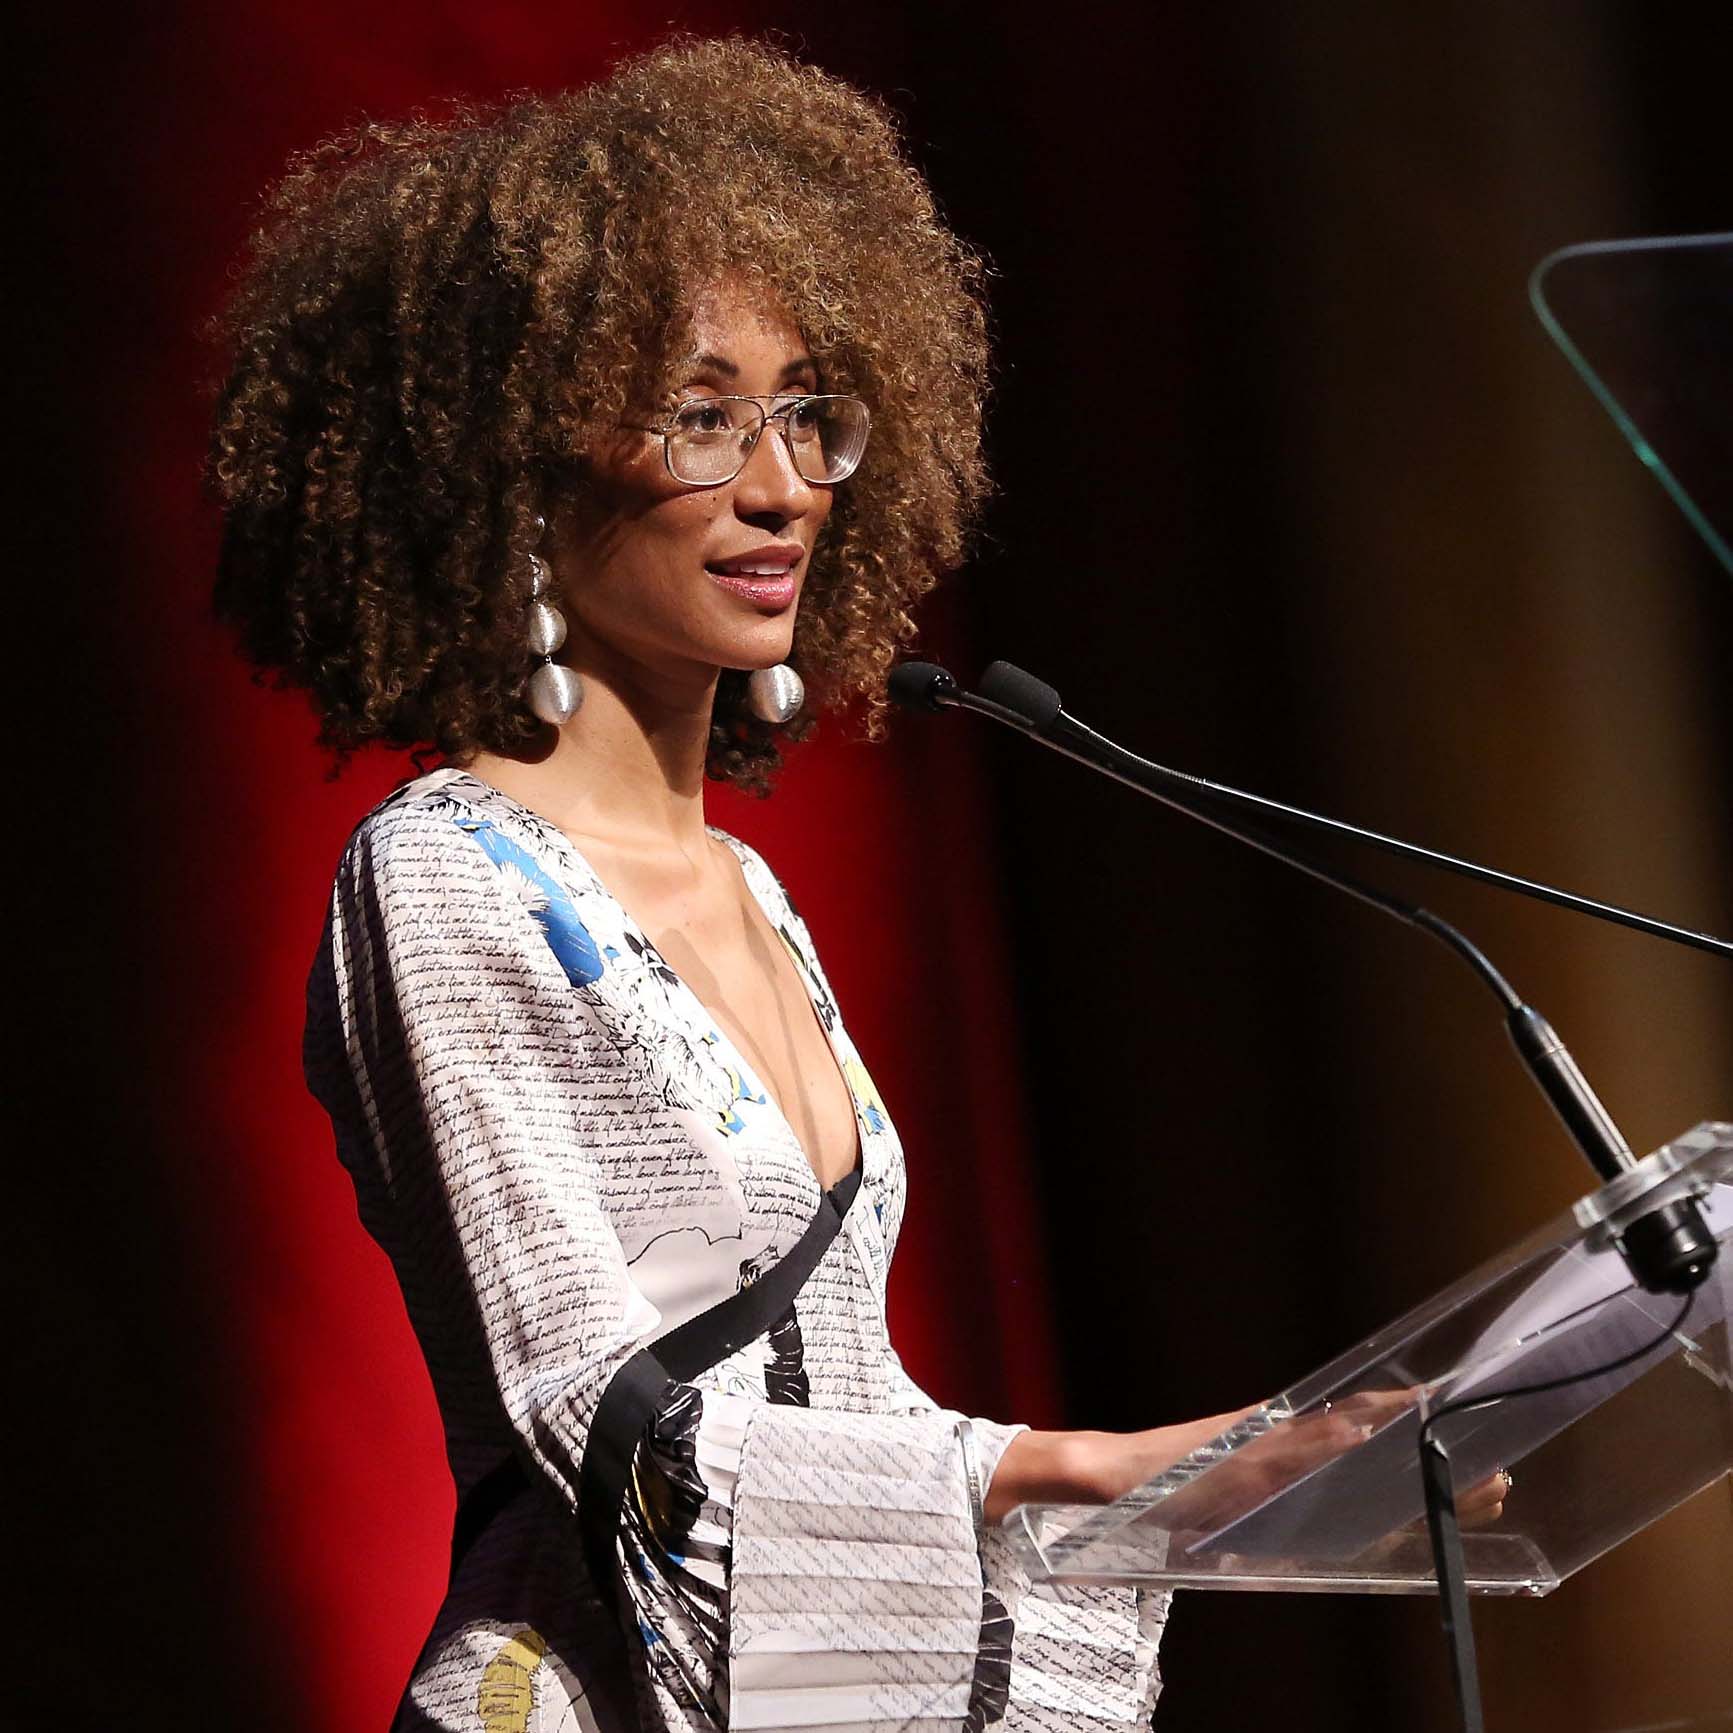 Elaine Welteroth speaking at the Ms. Foundation 30th Annual Gloria Awards in 2018.